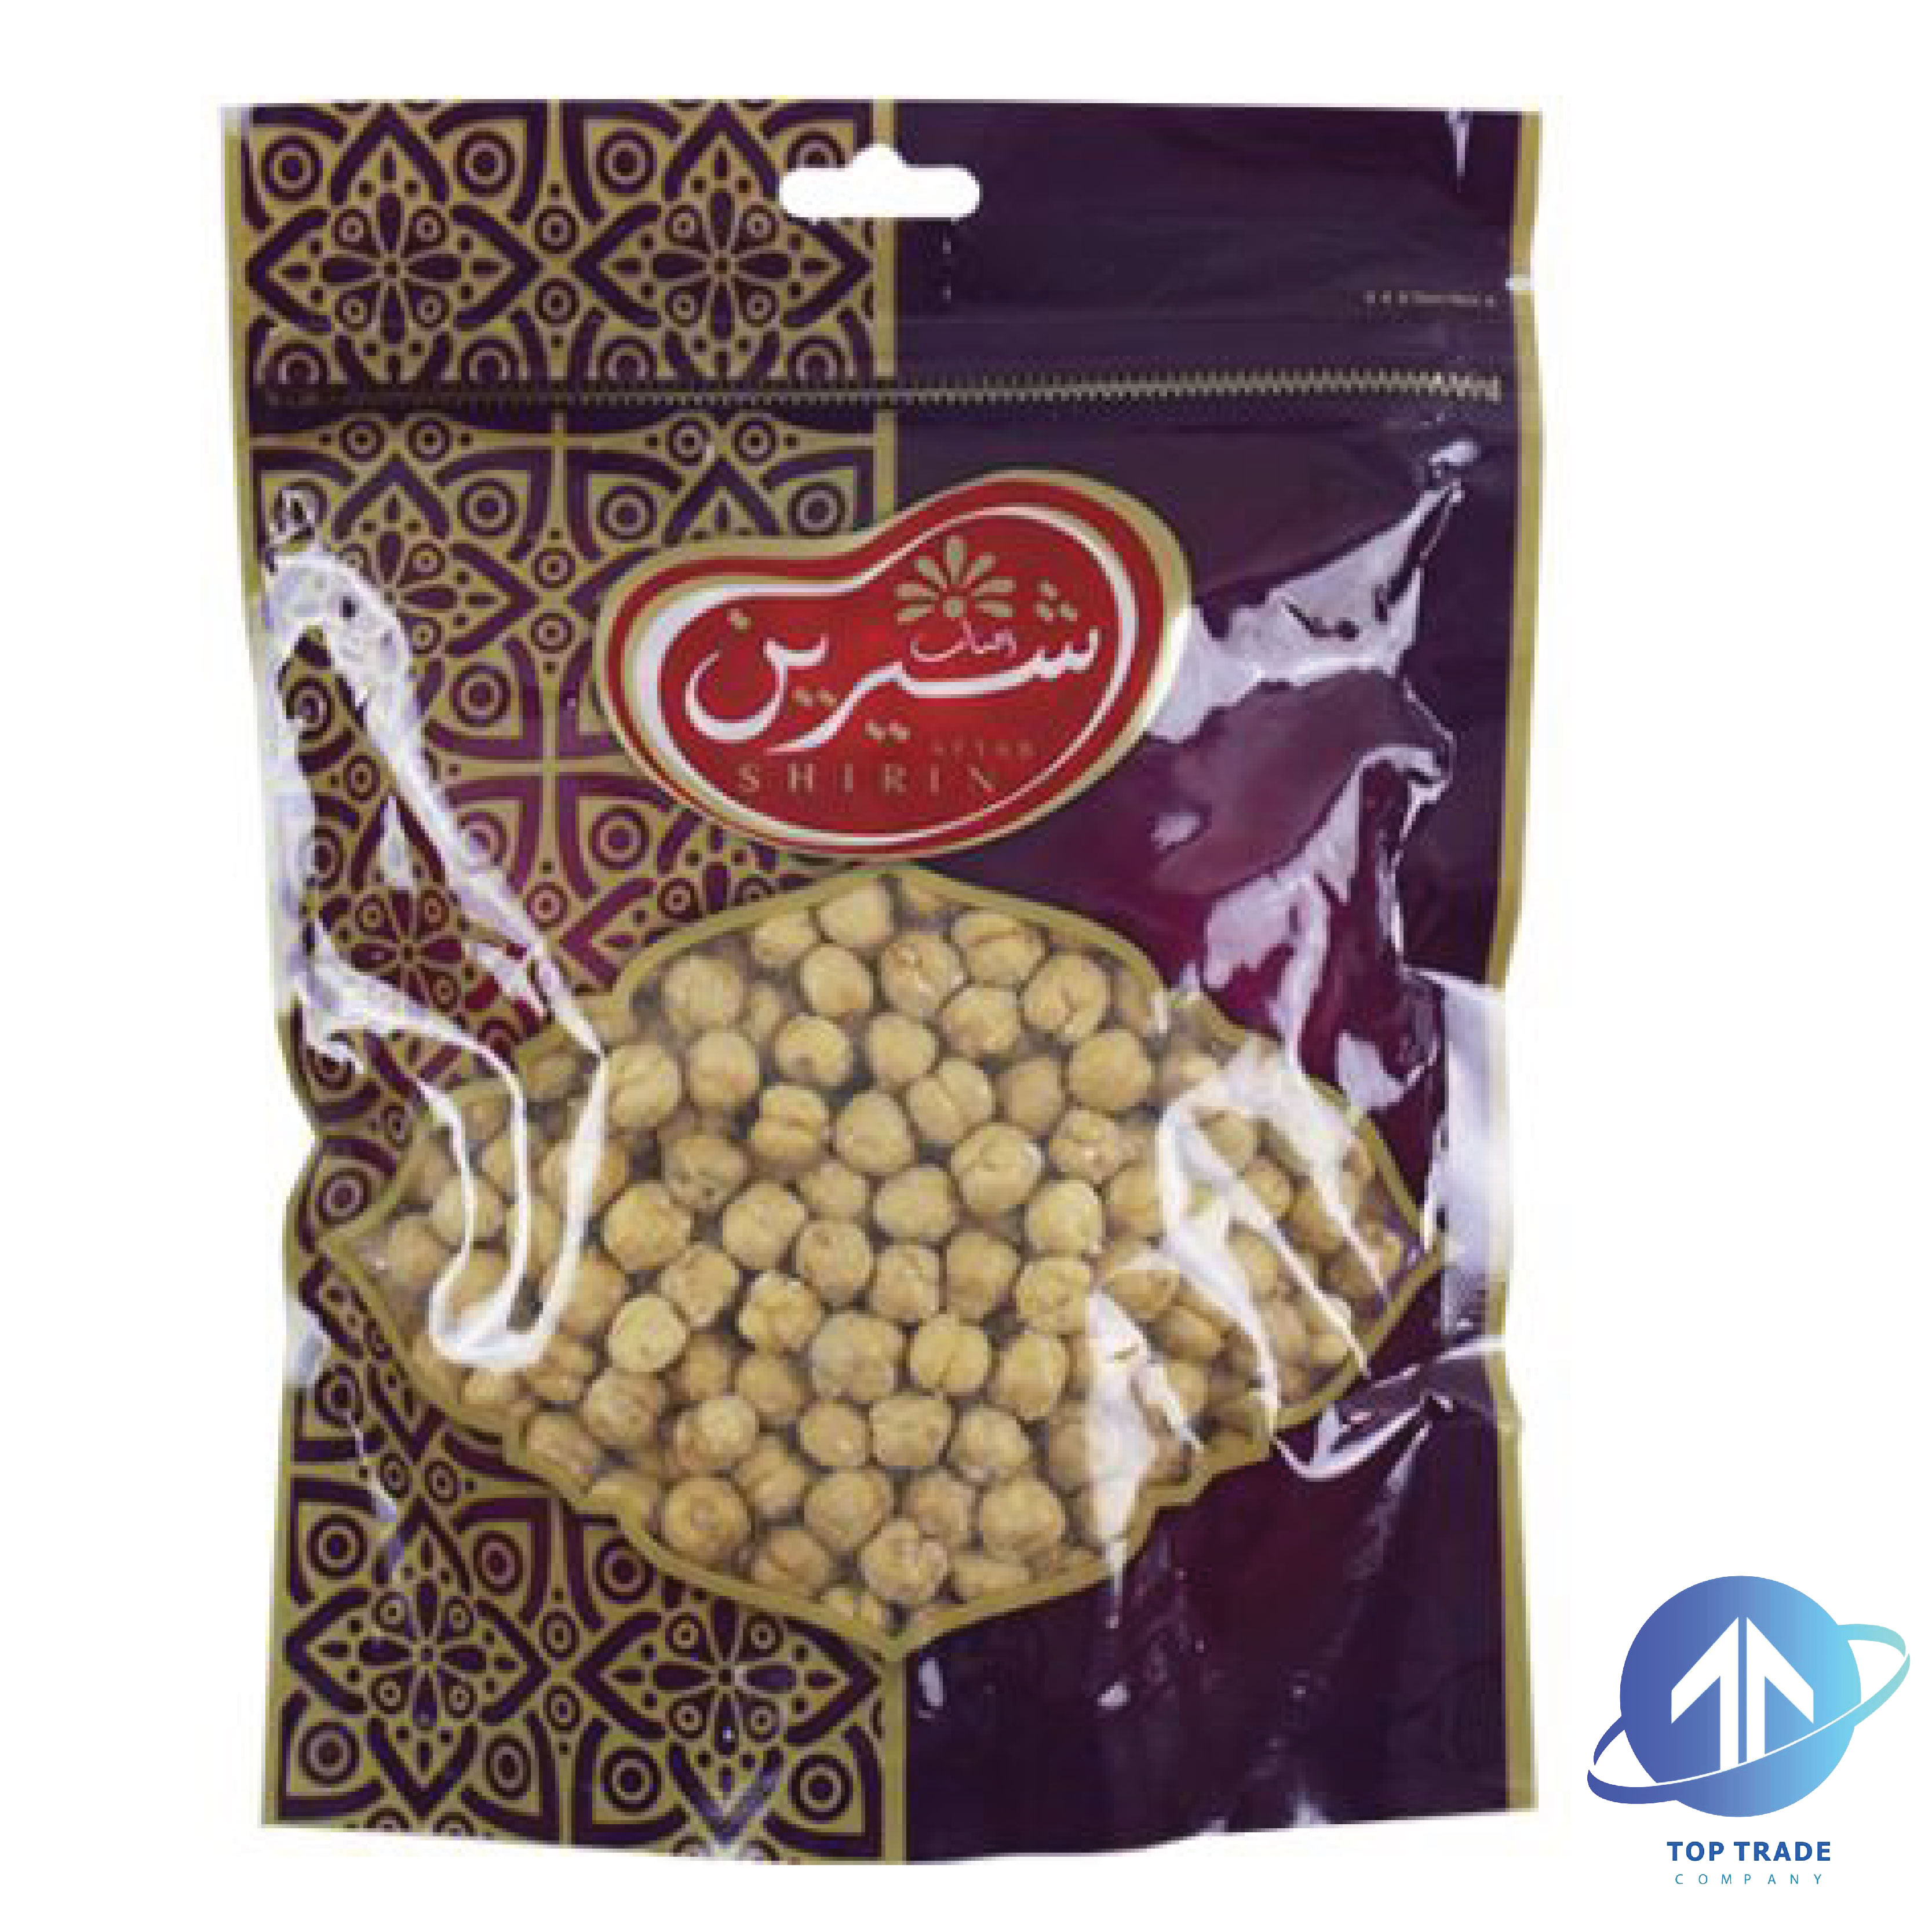 Aftab shirin Rosted Chickpeas salted 200gr